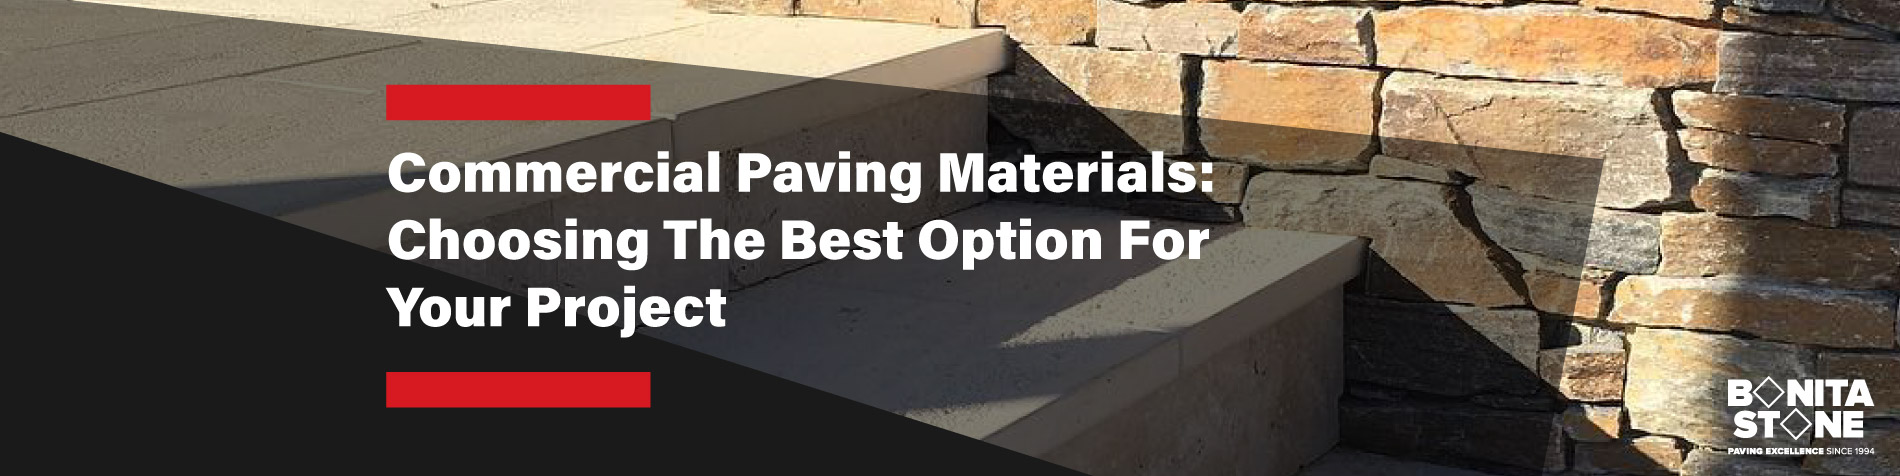 commercial-paving-materials-images-banner